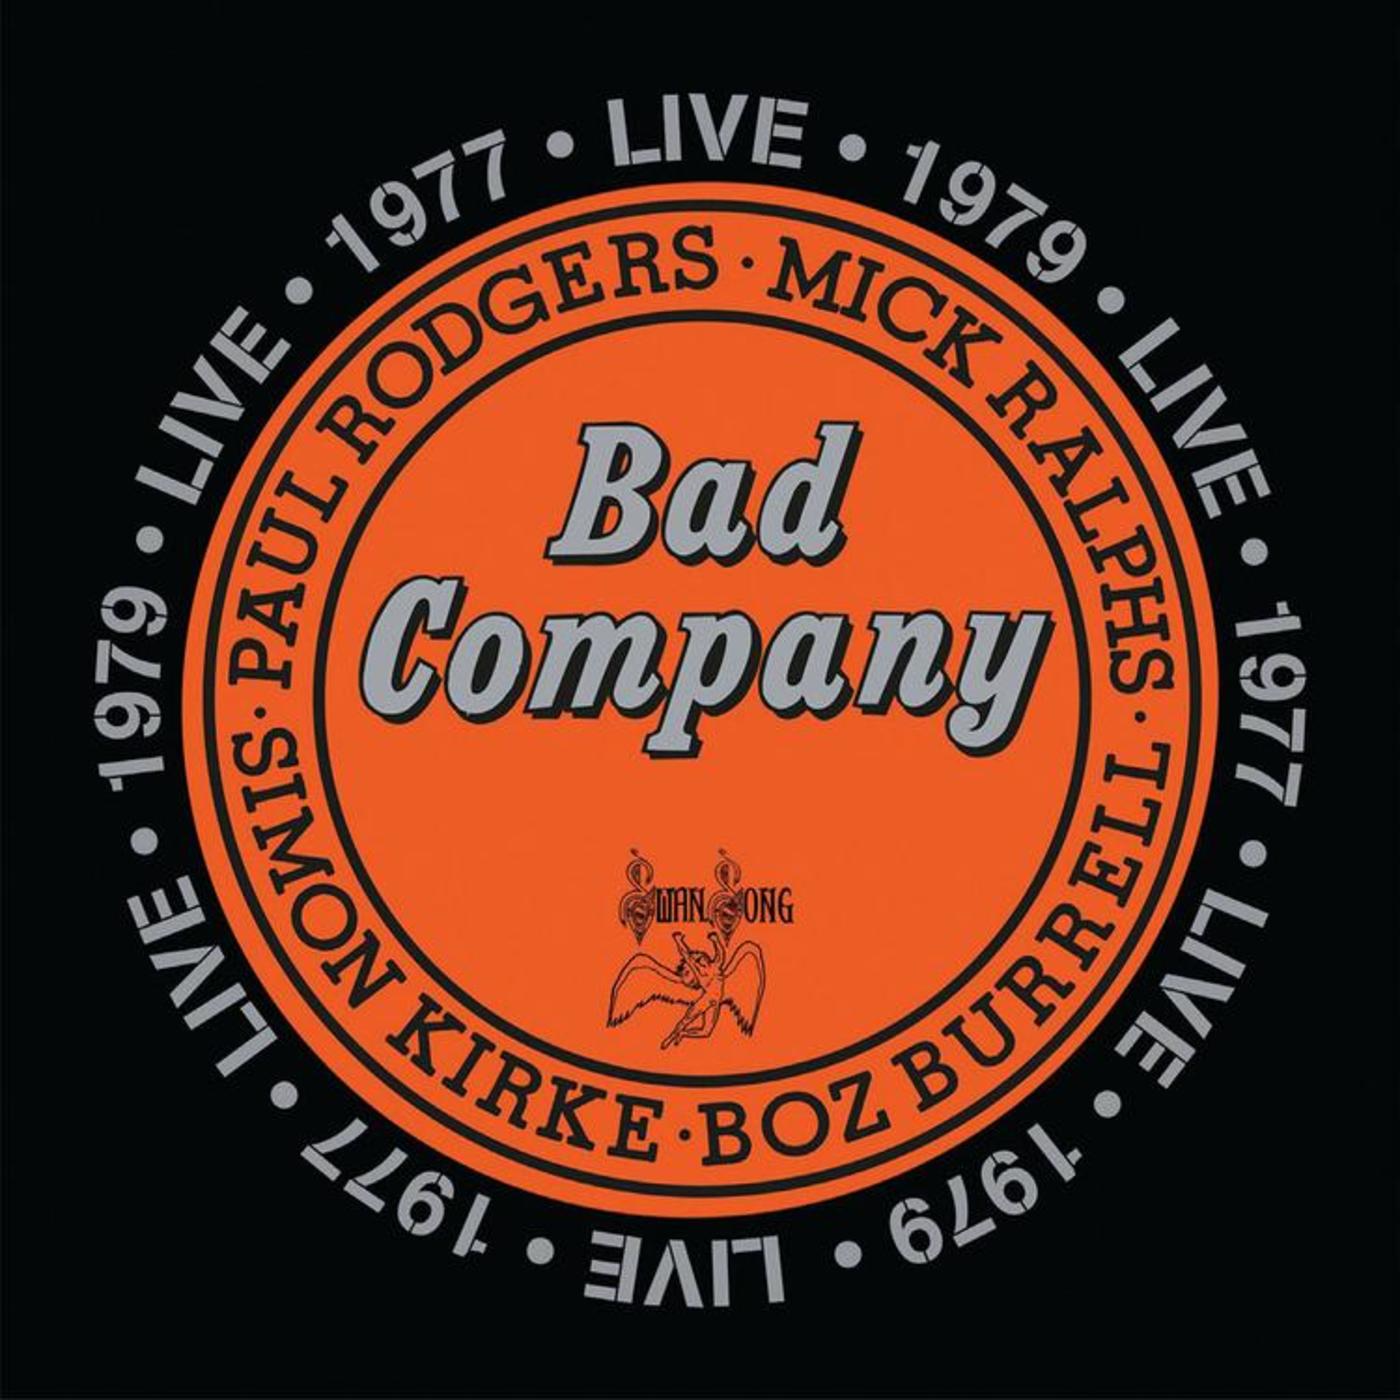 Bad Company Live In Concert 1977 & 1979